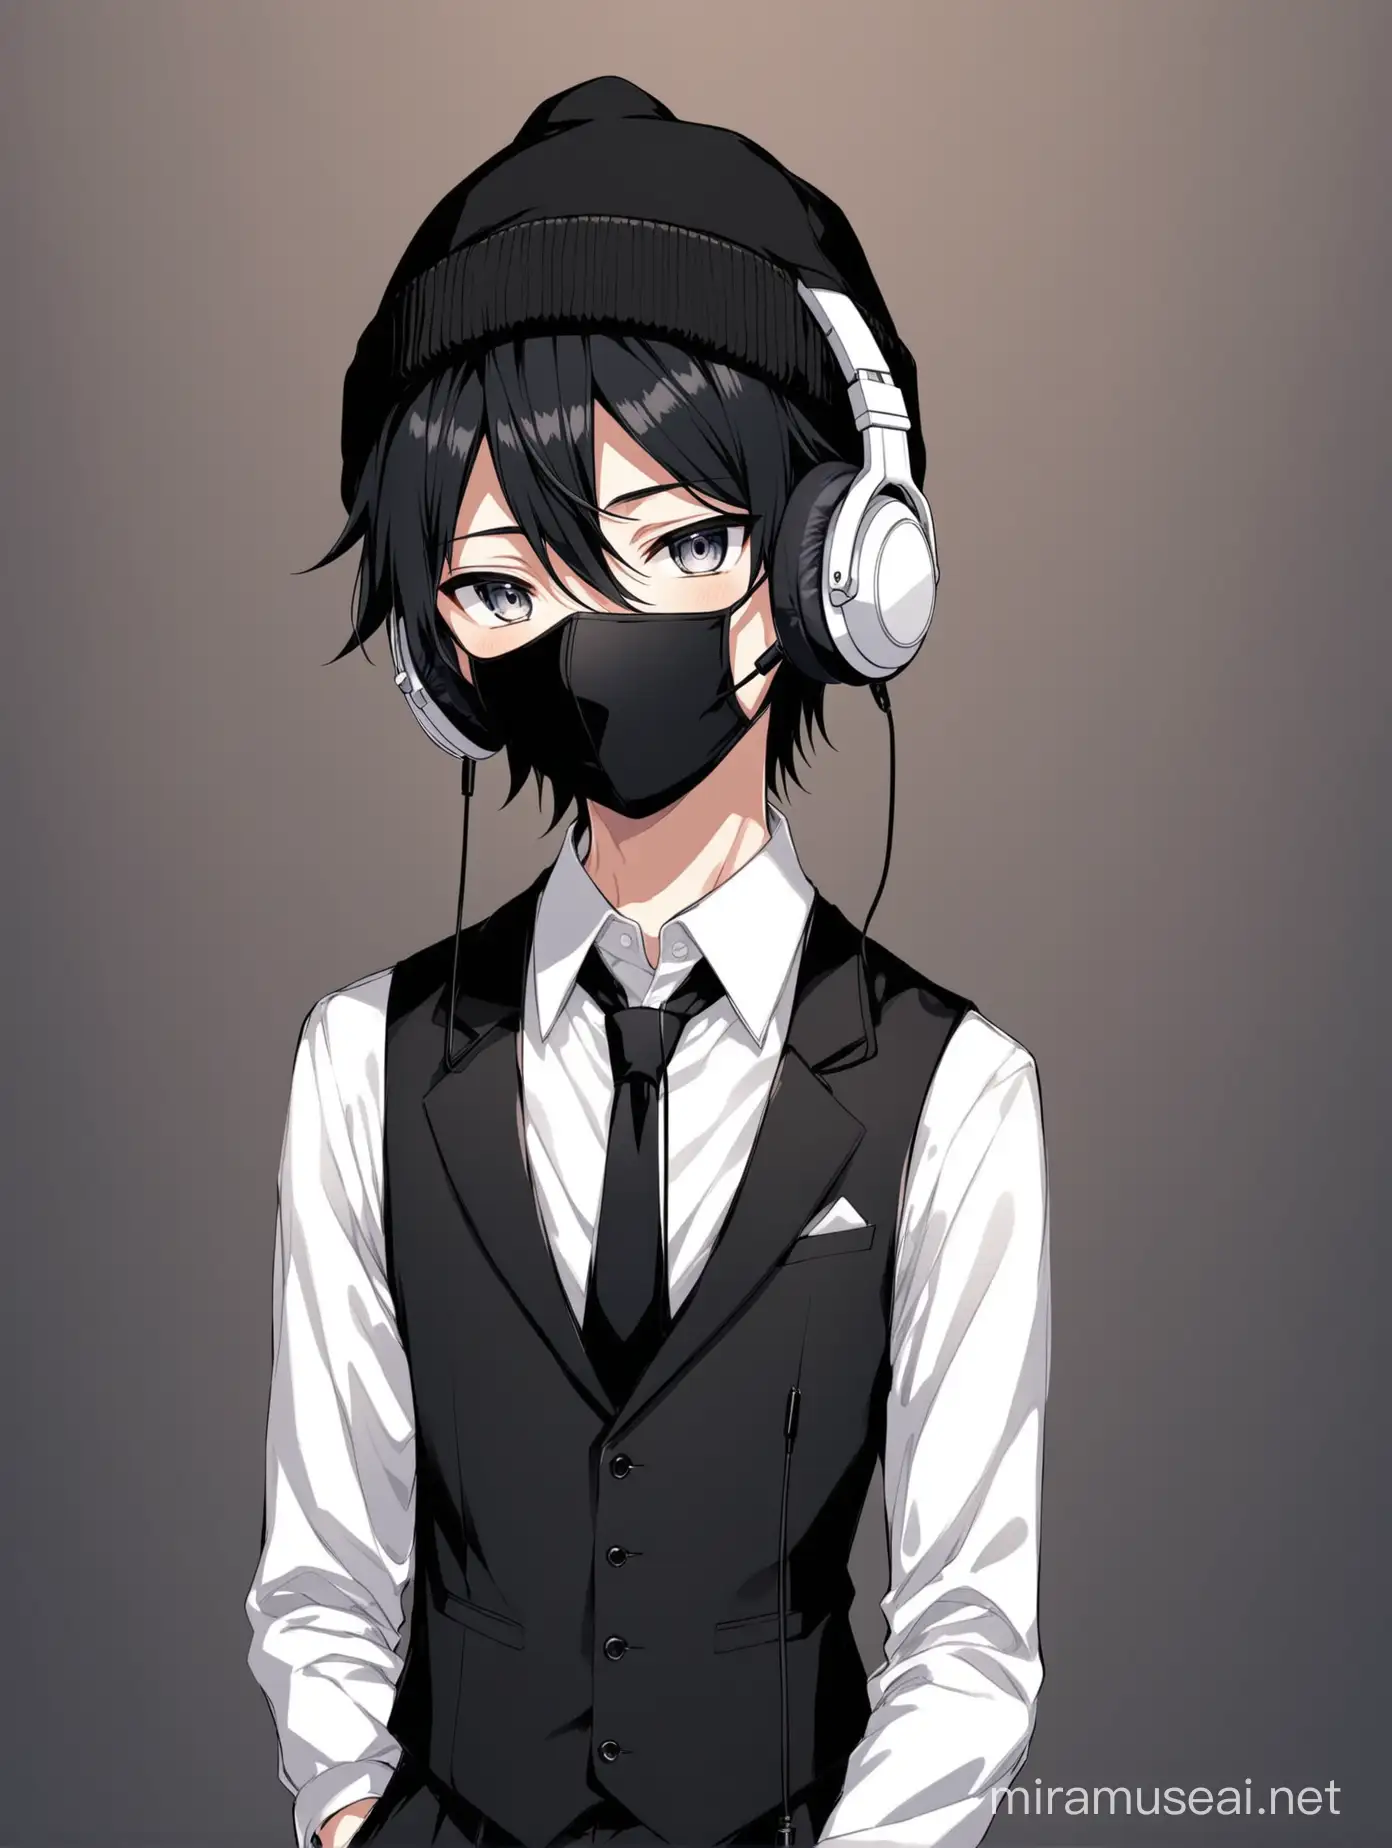 Stylish Anime Boy in Black Suit with Mask and Headphones